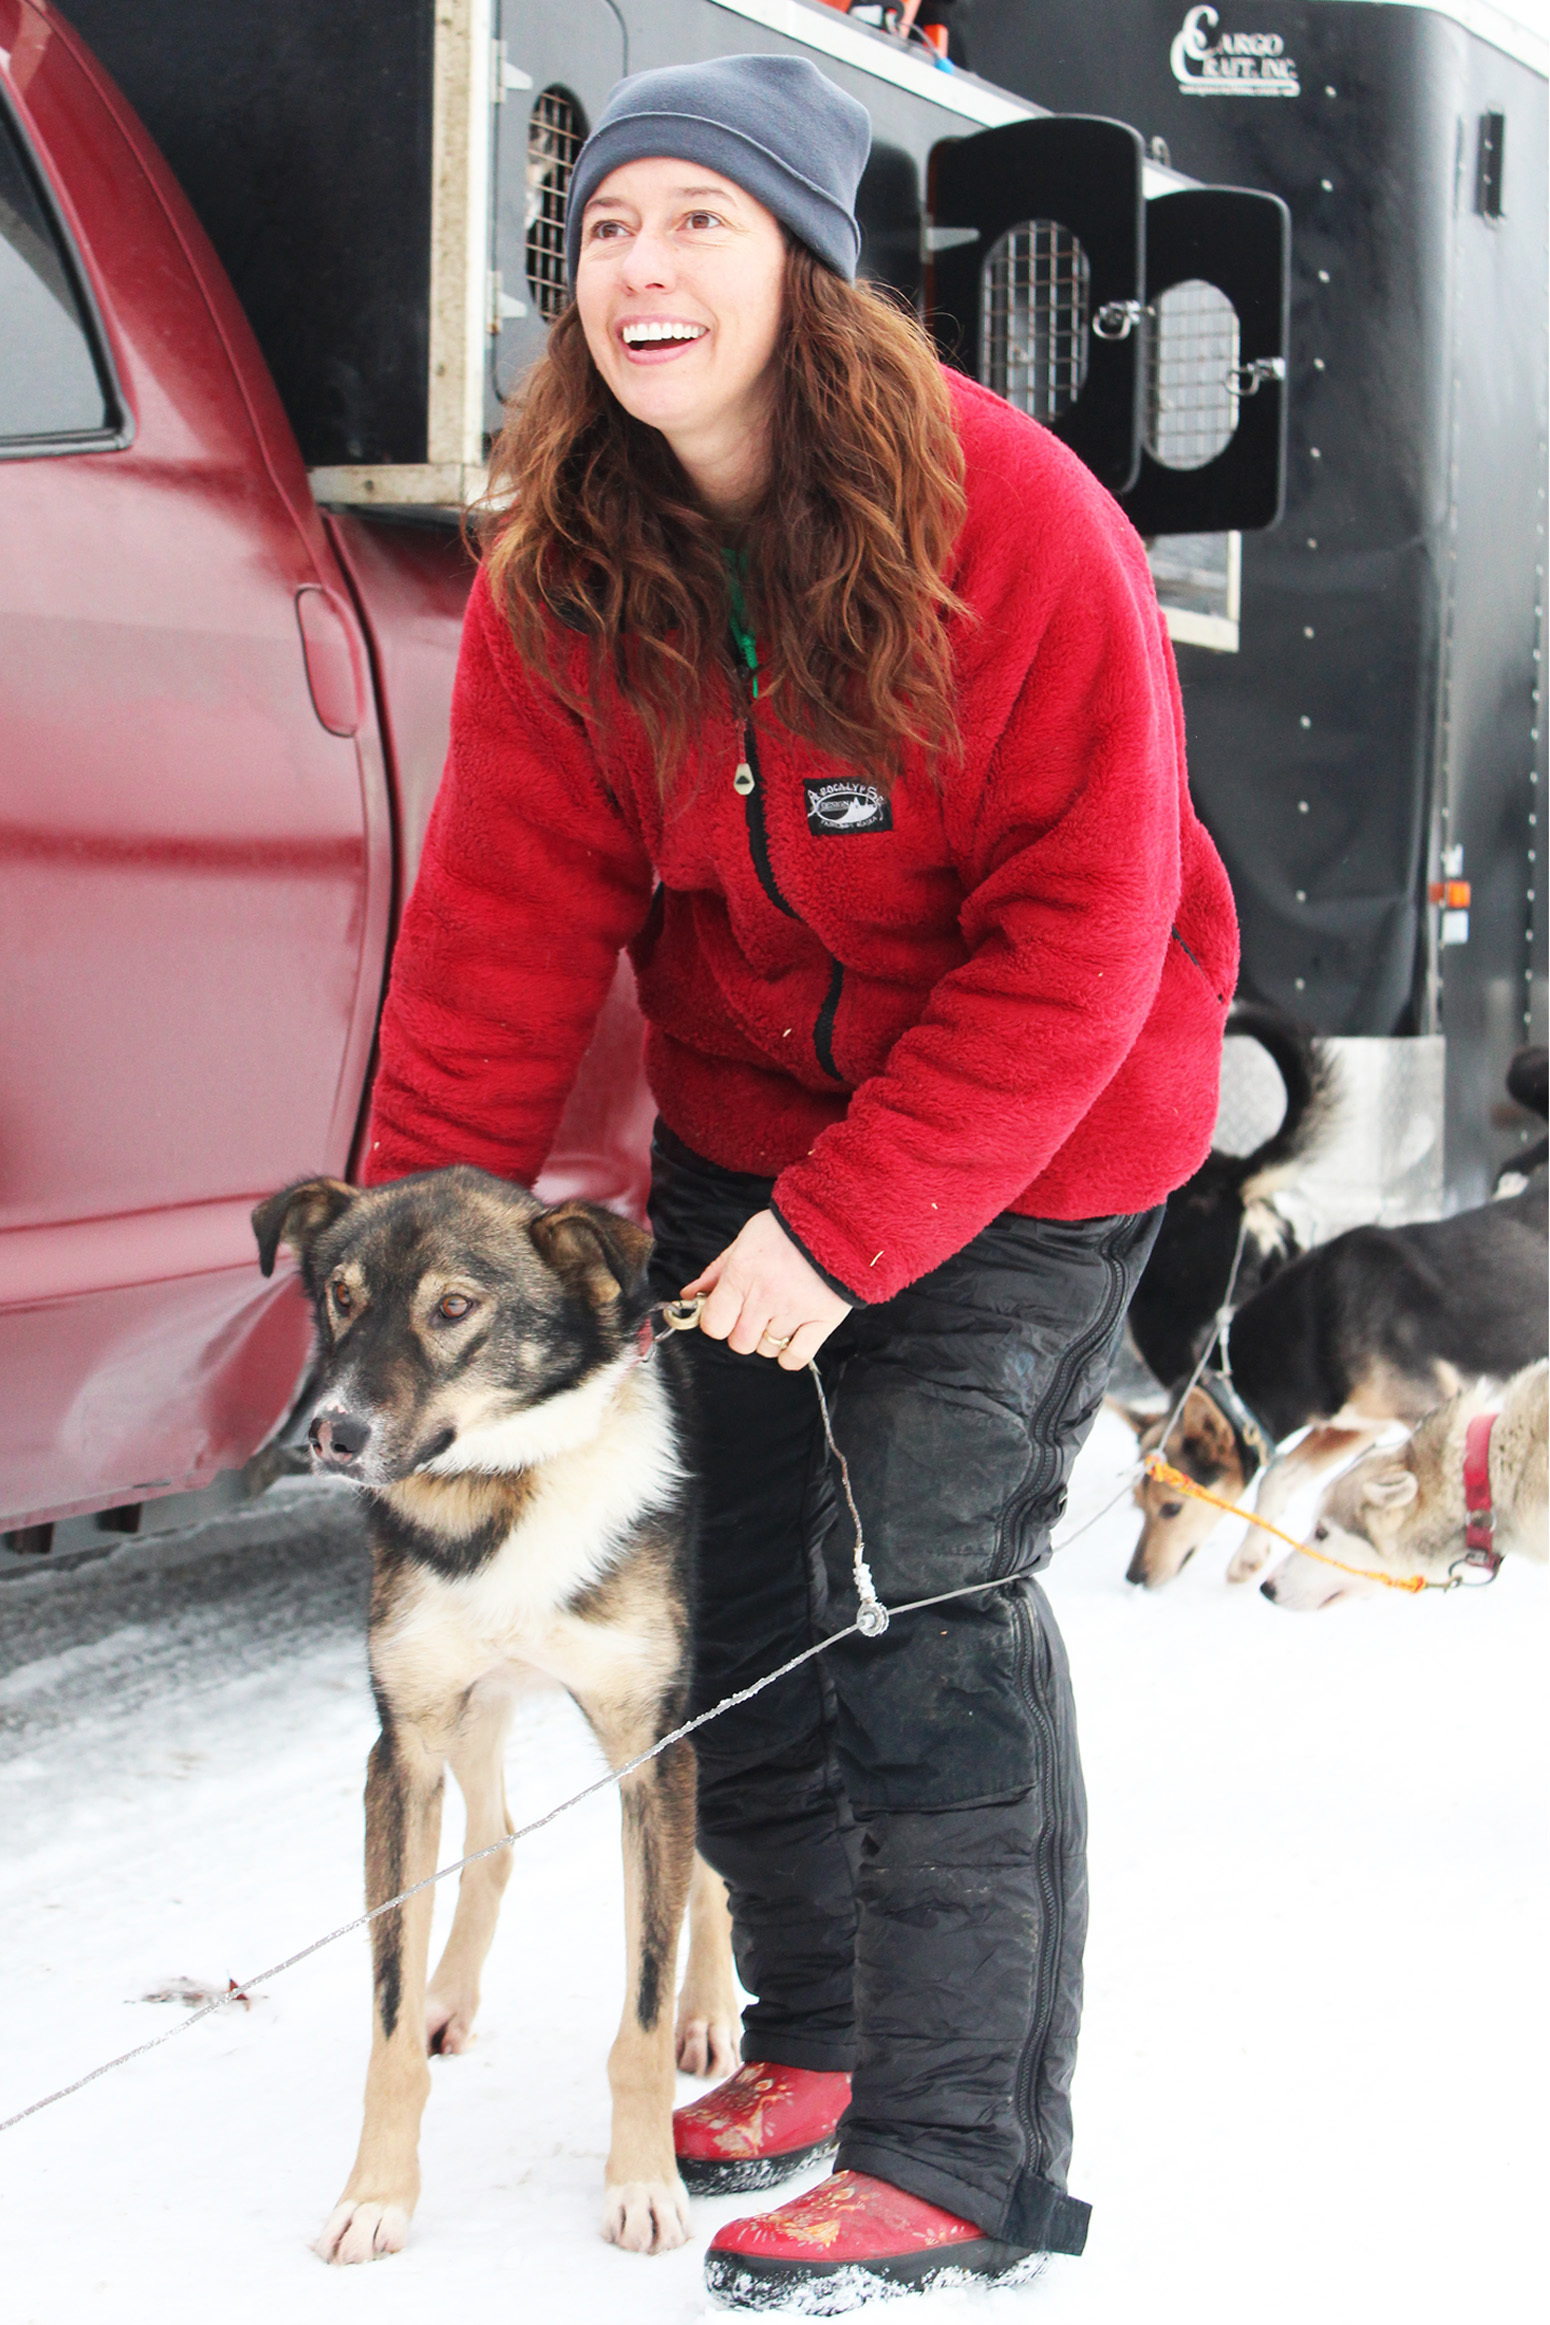 Kristin Bacon clips a sled dog named Crosby onto a line before her team gets checked by veterinarians Friday, Jan. 27, 2017 outside the Soldotna Regional Sports Complex in Soldotna, Alaska. Crosby, who is racing with Bacon in the Tustumena 200 Sled Dog Race, suffered a broken leg in the 2016 Iditarod Trail Sled Dog Race when musher Jeff King and his team were hit by a man on a snowmobile who was driving drunk. The man had aimed his snowmobile at King and the sled of another musher, and was later sentenced to jail time and ordered to pay restitution. No one had high hopes that Crosby would race again, Bacon said, but he has made an impressive recovery. (Megan Pacer/Peninsula Clarion)